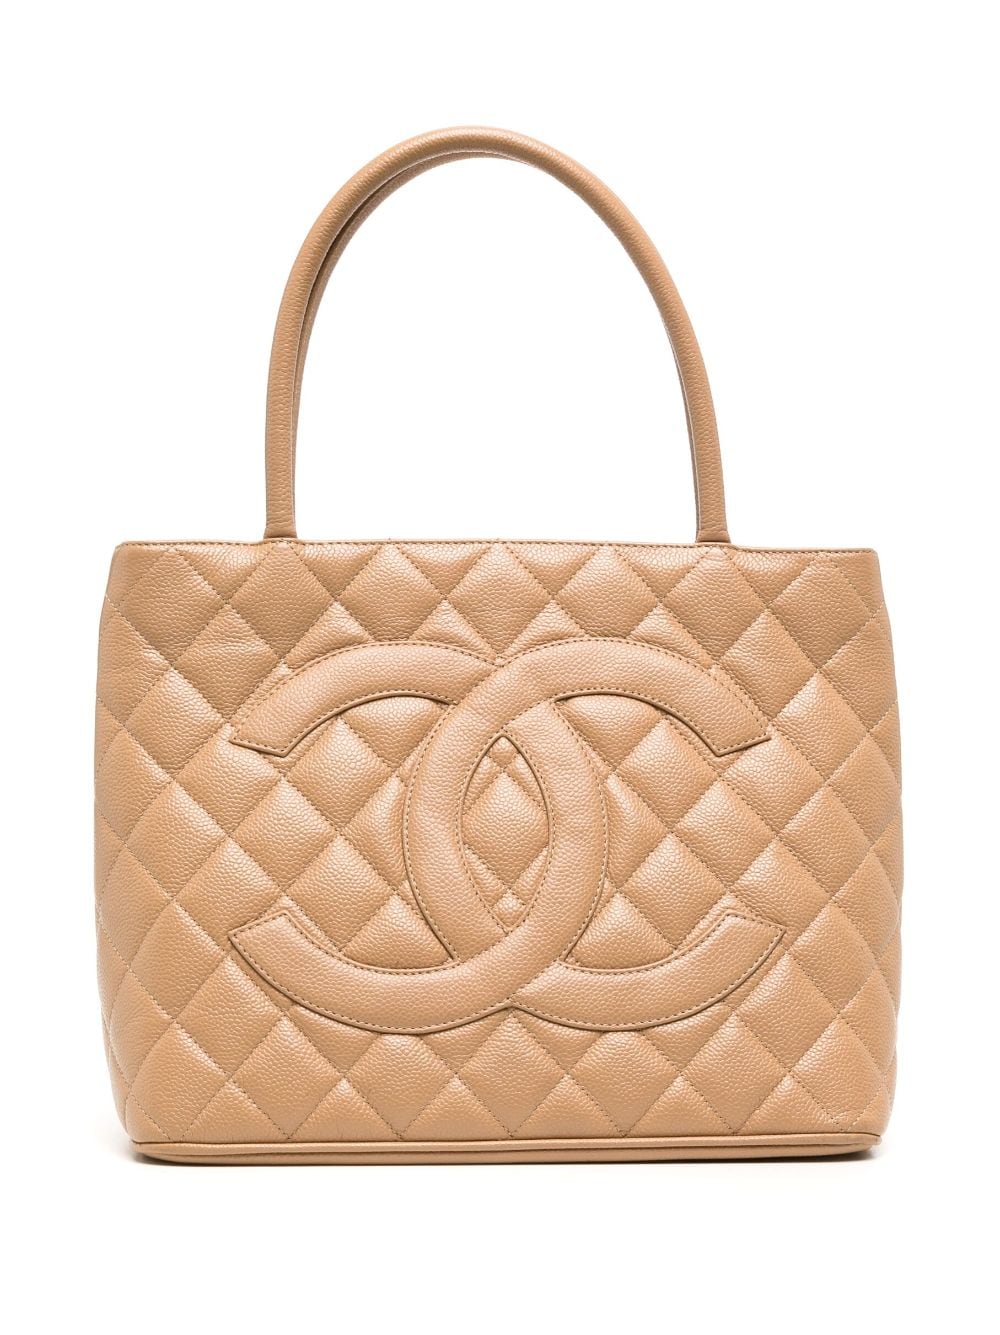 Pre-owned Chanel 2000 Medallion Tote Bag In Neutrals